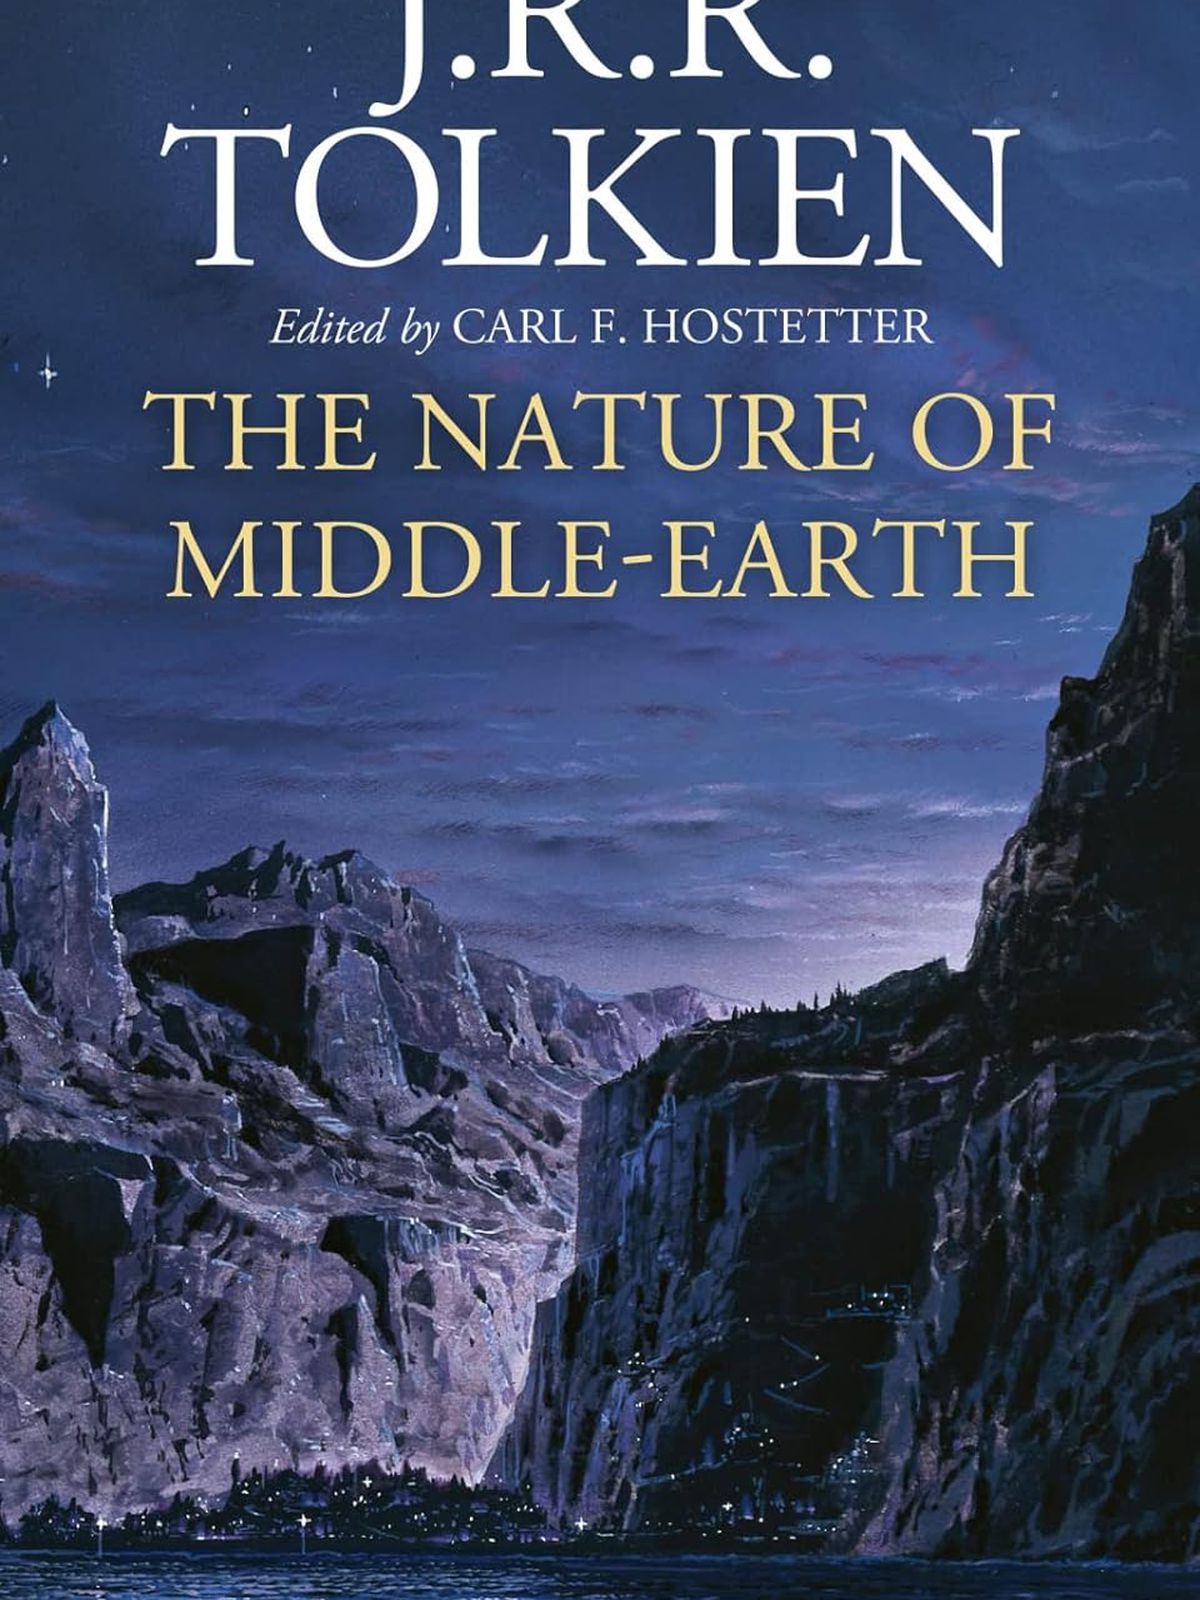 The cover of The Nature of Middle-earth by J.R.R. Tolkein, which shows a river with mountains on either side.